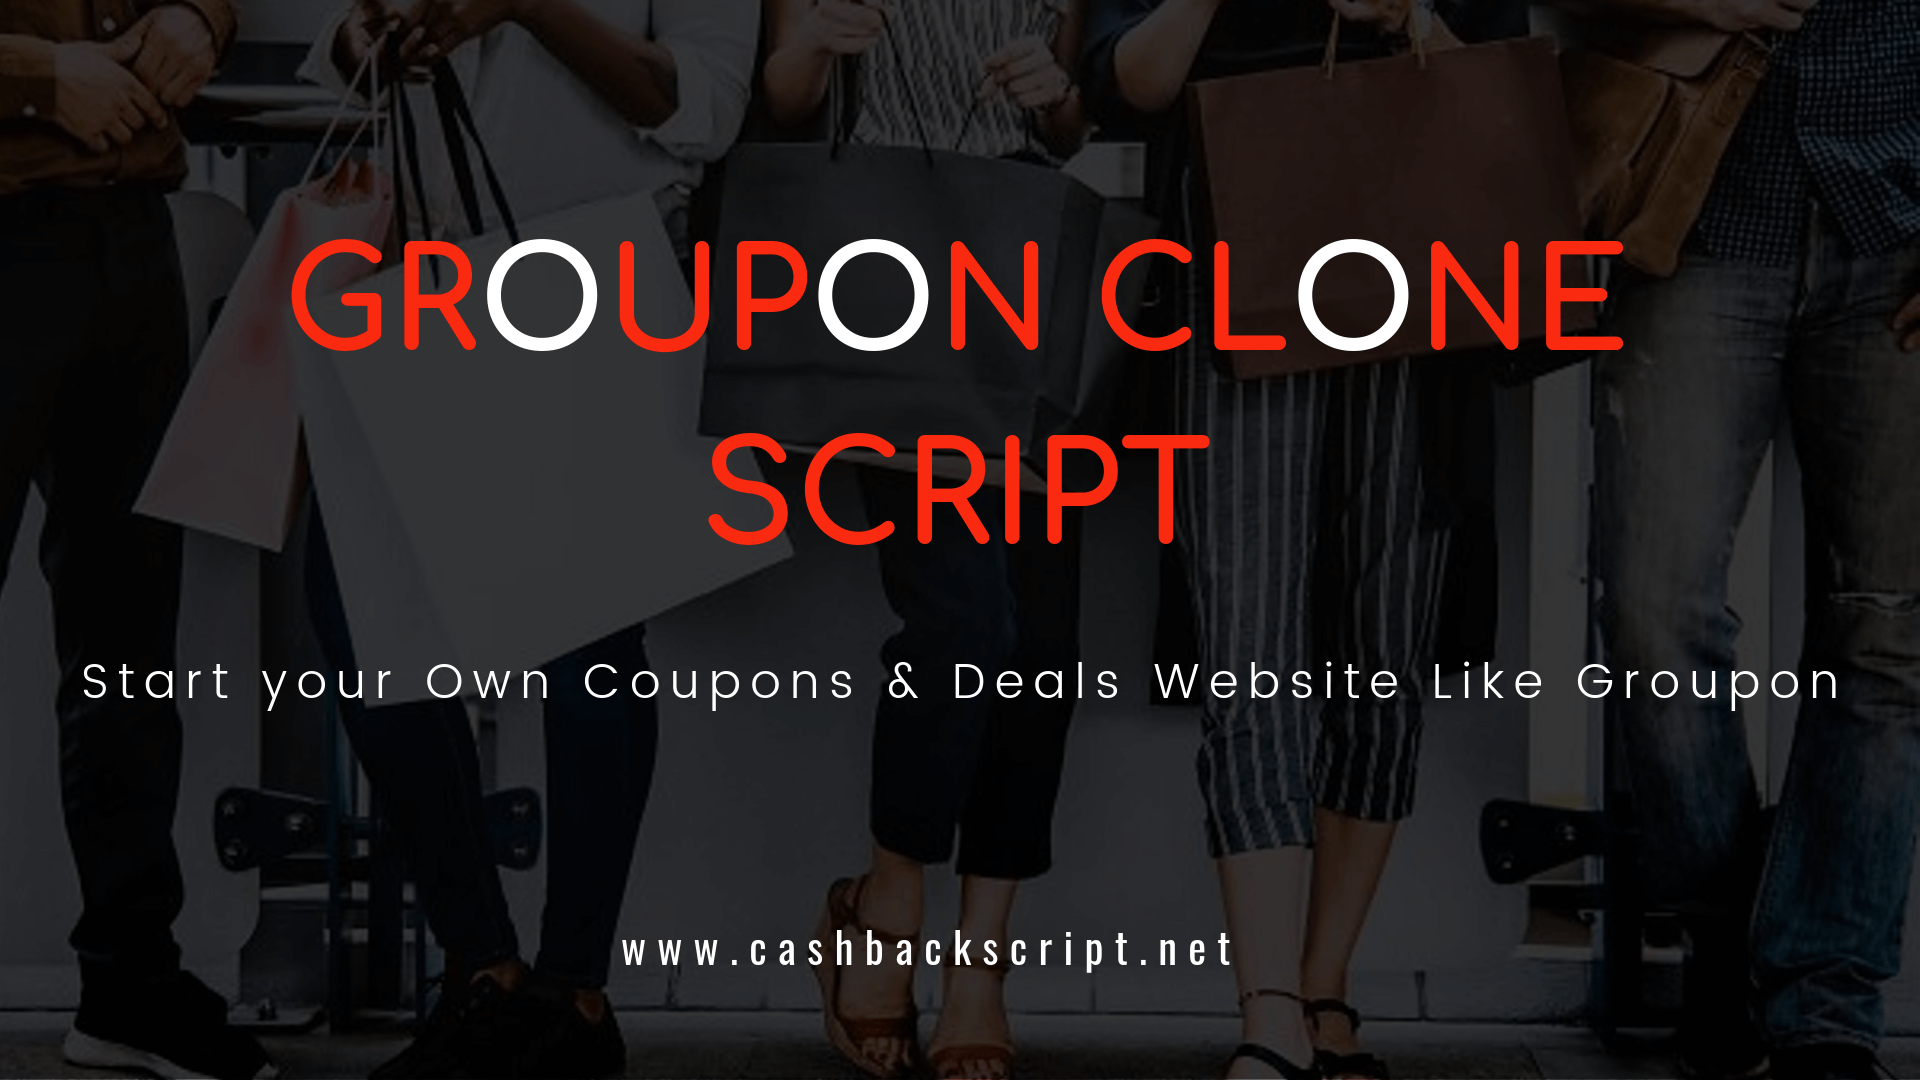 Groupon Clone Script to Start your own Coupons & Deals Website